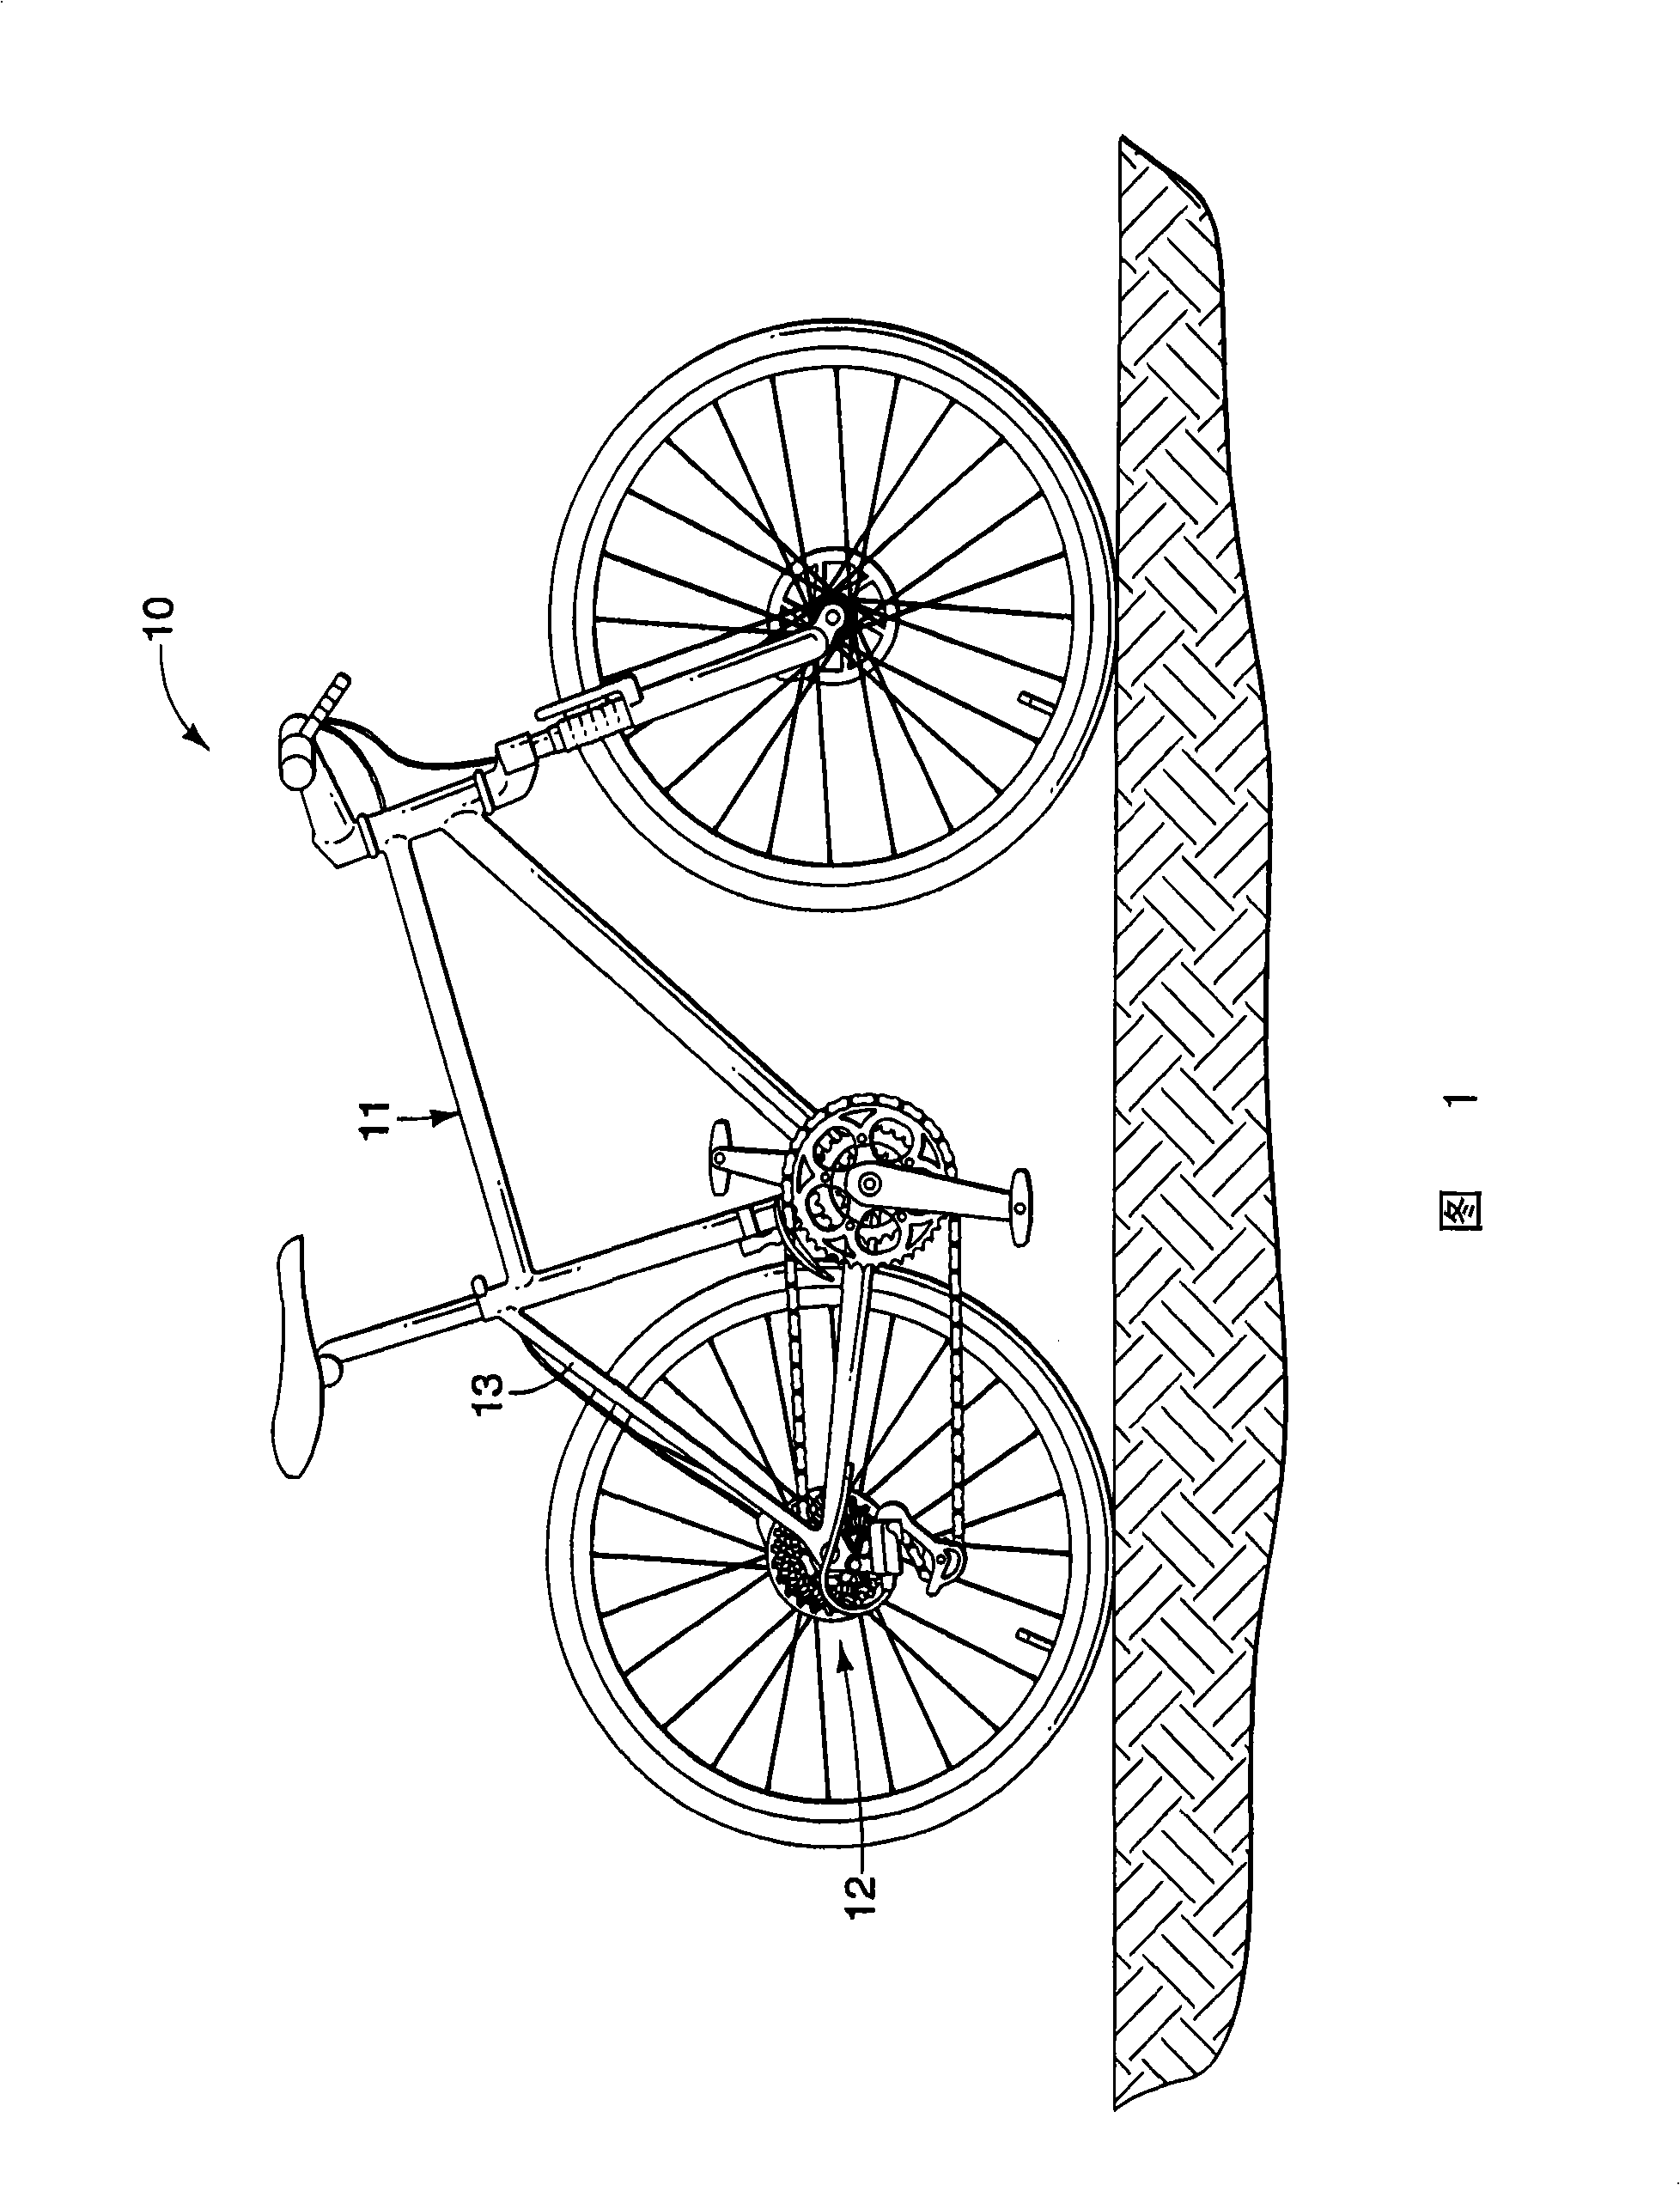 Bicycle wheel securing structure